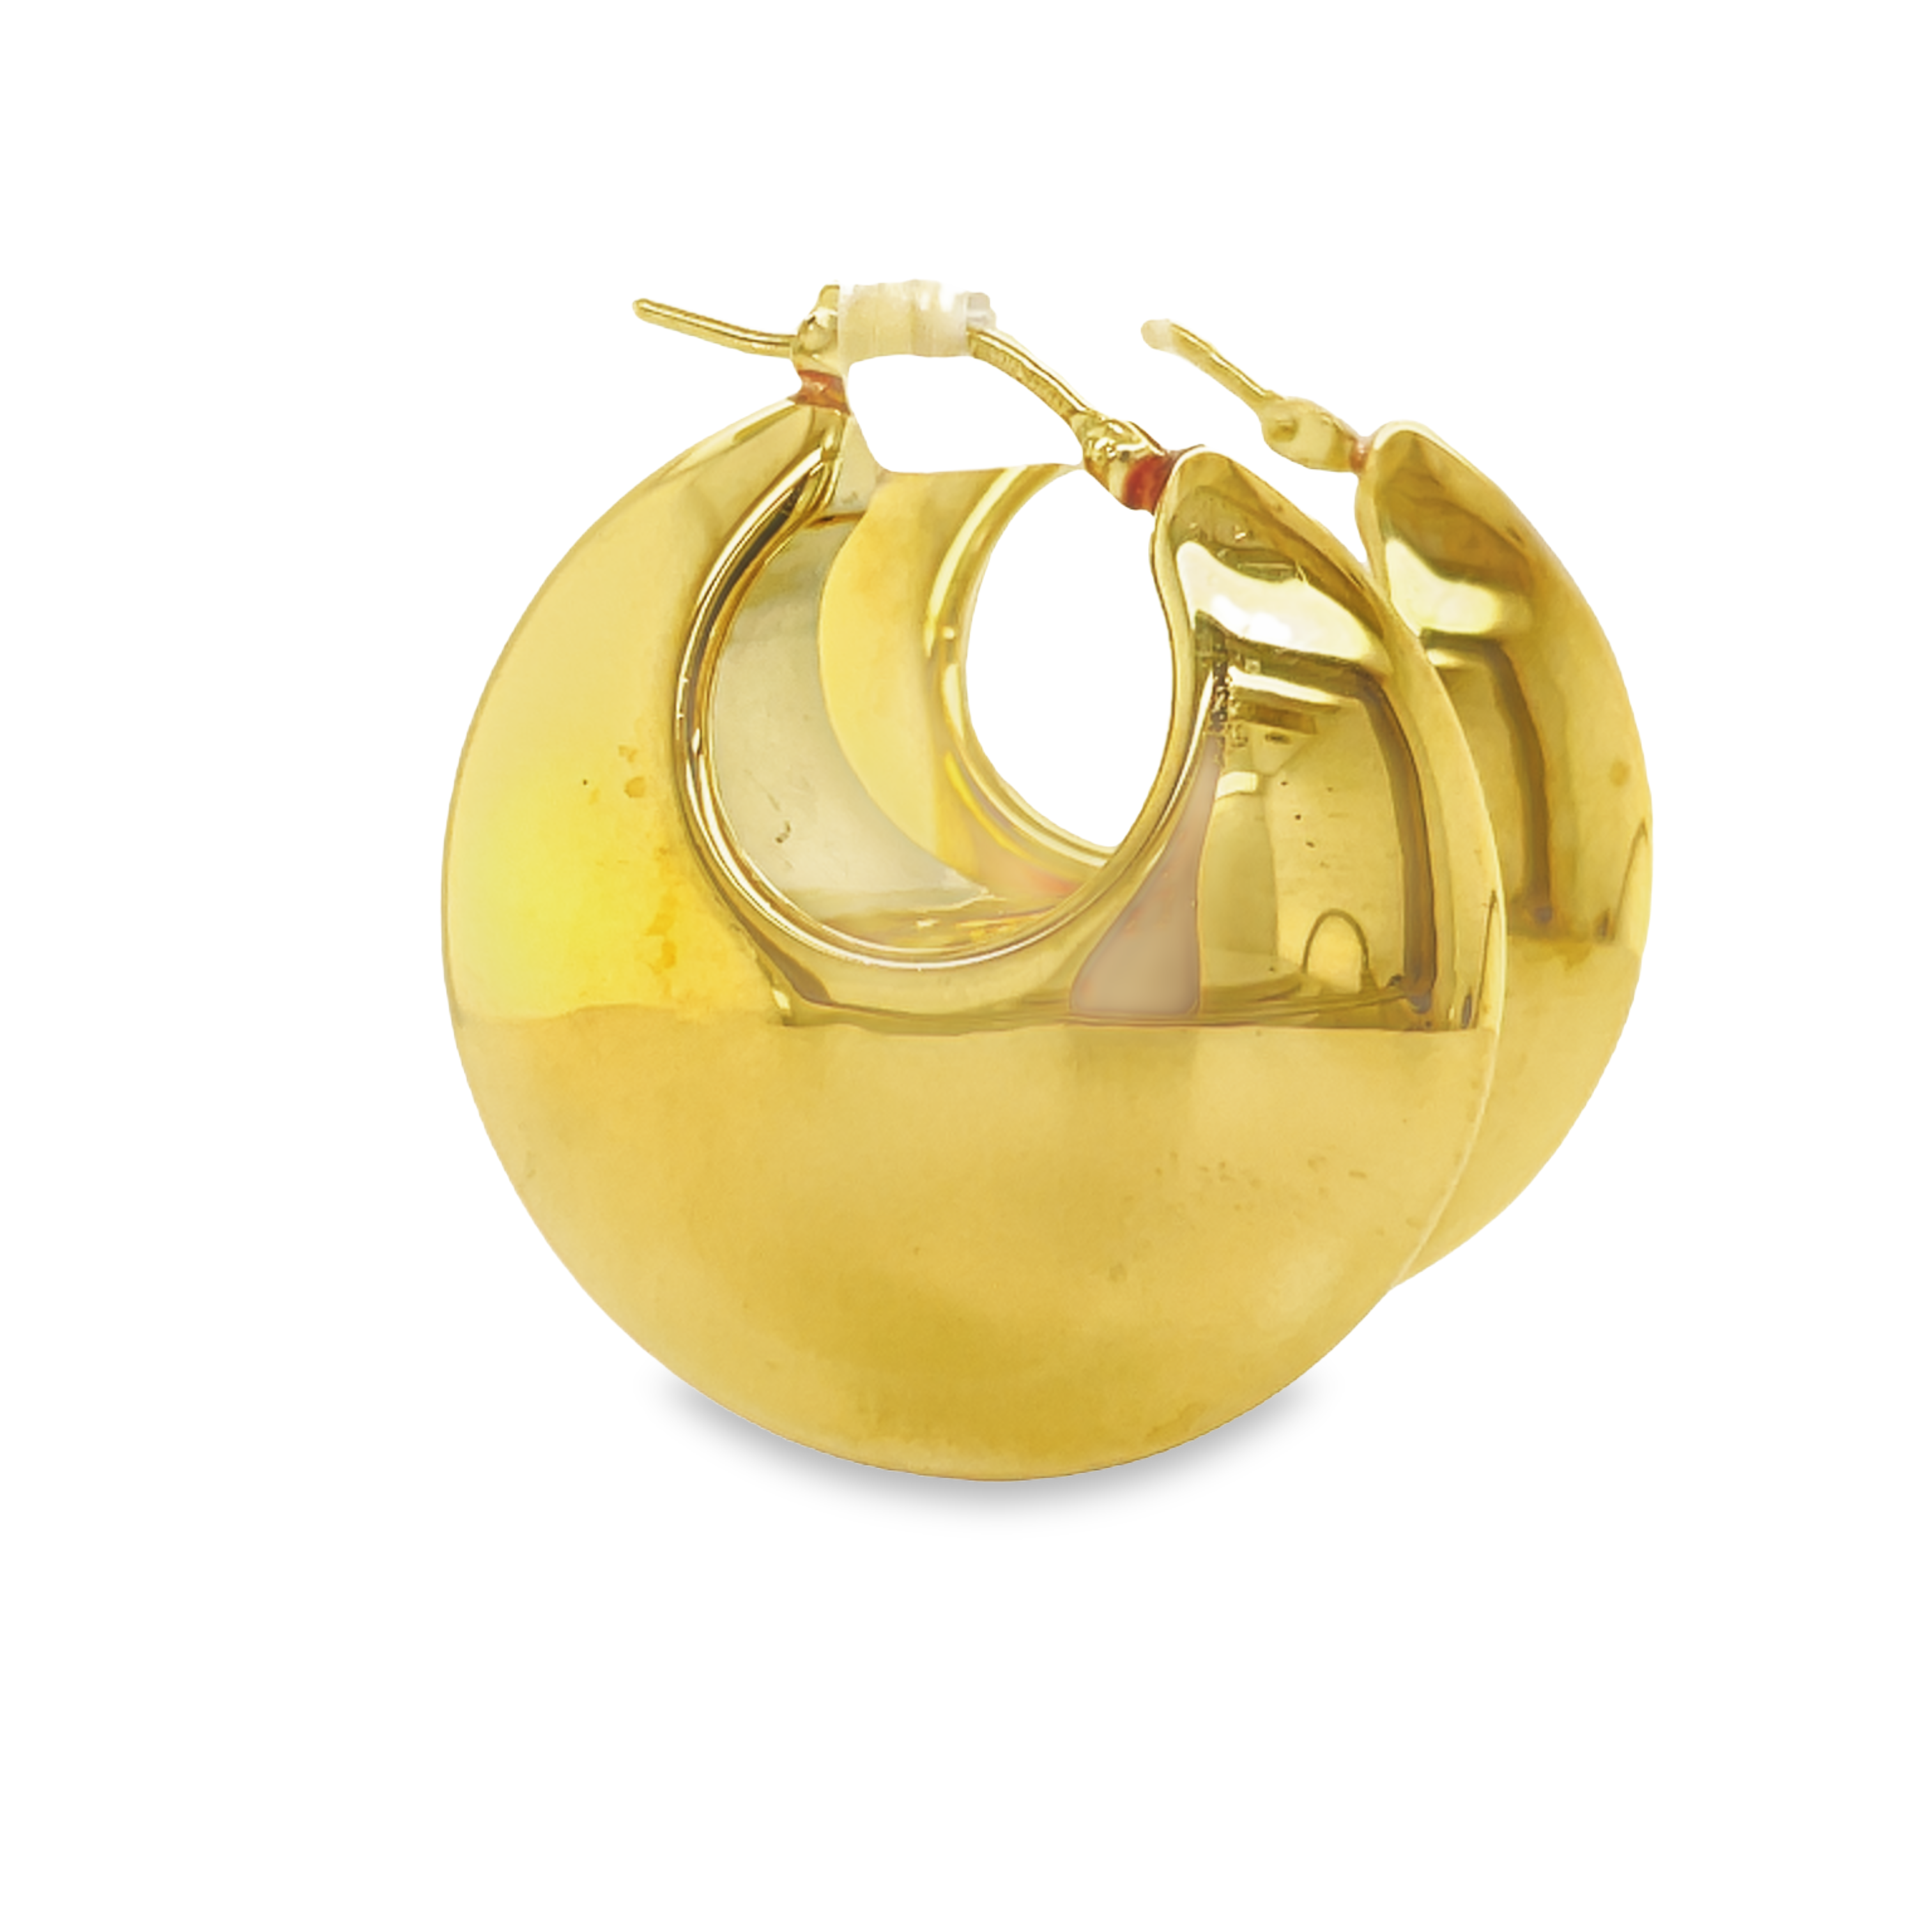 These 14k Italian Yellow Gold Puff Disk Hoop Earrings make a perfect statement piece. These earrings effortlessly combine classic style with modern flair. Wear them with your favorite outfits and turn heads in any crowd. 1" long